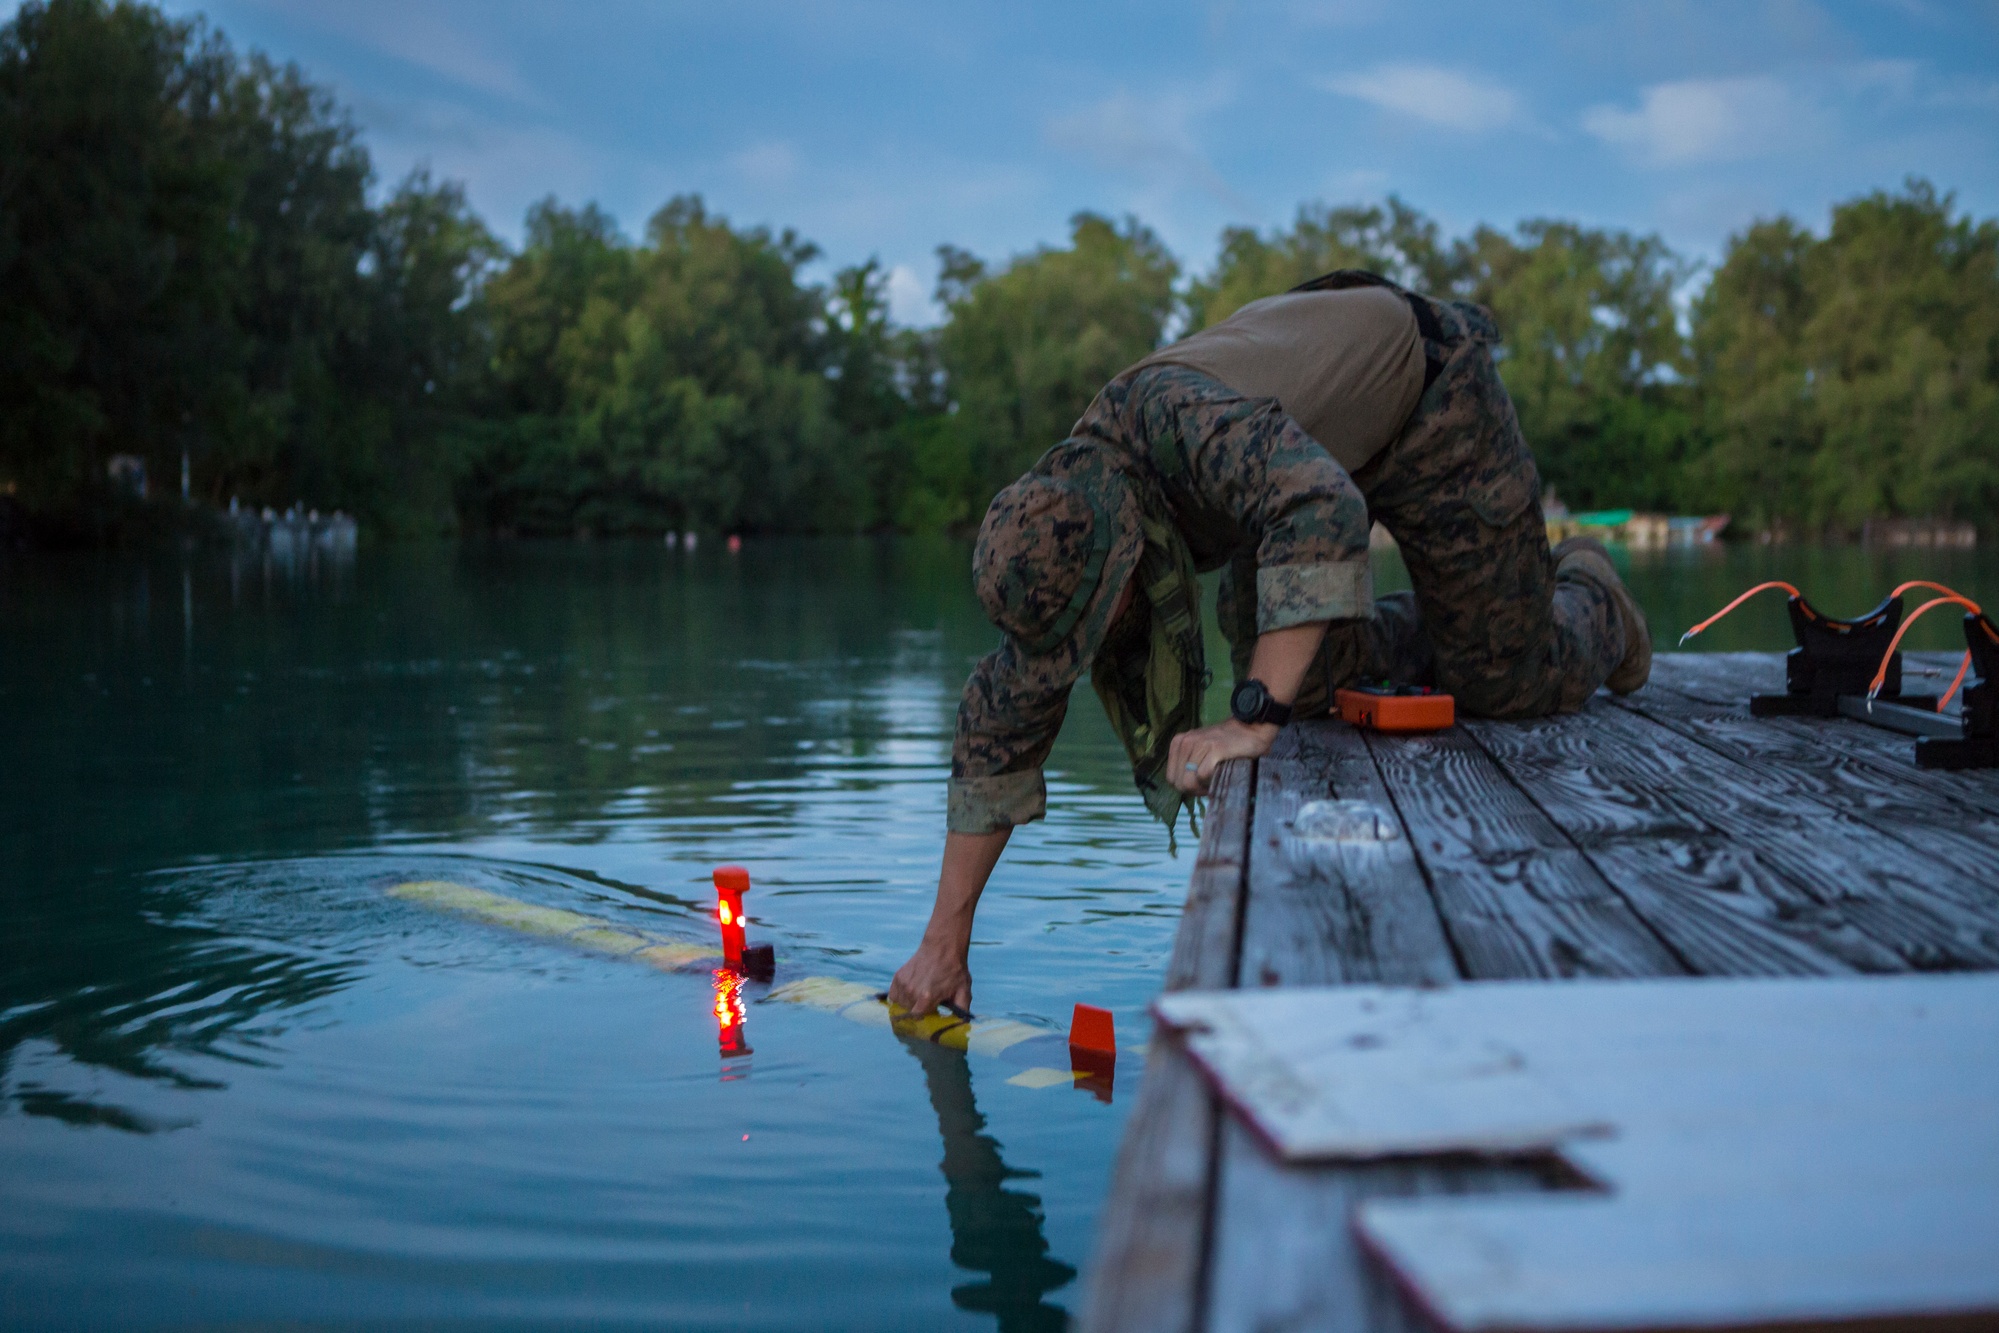 U.S. Marine Corps Staff Sgt. Paul Butcher, a Littoral Explosive Ordnance Neutralization (LEON) Marine, with Task Force Koa Moana (TF KM) 20, I Marine Expeditionary Force (MEF), prepares to conduct hydrographic surveys with the Iver 3 unmanned underwater vehicle in Peleliu, Republic of Palau, Aug. 2, 2020. Marines and Sailors with TF KM20, are conducting engagements in the Republic of Palau from July through September of 2020. Koa Moana, meaning “ocean warrior,” is designed to strengthen and enhance relationships between the U.S. and partner nations/states in the Indo-Pacific region, improve interoperability with local security establishments, and serve as a Humanitarian Assistance Survey Team afloat in support of U.S. Indo-Pacific Command’s strategic and operational objectives. TF KM20 provides a unique opportunity to enhance relationships in the Republic of Palau. The Koa Moana task force has taken extensive measures to mitigate the spread of COVID-19. The health and safety of U.S. service members and Palauan citizens participating in TF KM20 is an enduring priority. Prior to deploying, all exercise members participated in a three-week quarantine. After arriving in Palau, the Marines and Sailors remain quarantined for an additional 14 days. To date, all members deployed as part of TF KM20 tested negative for COVID-19. (U.S. Marine Corps photo by Cpl. Anabel Abreu Rodriguez)